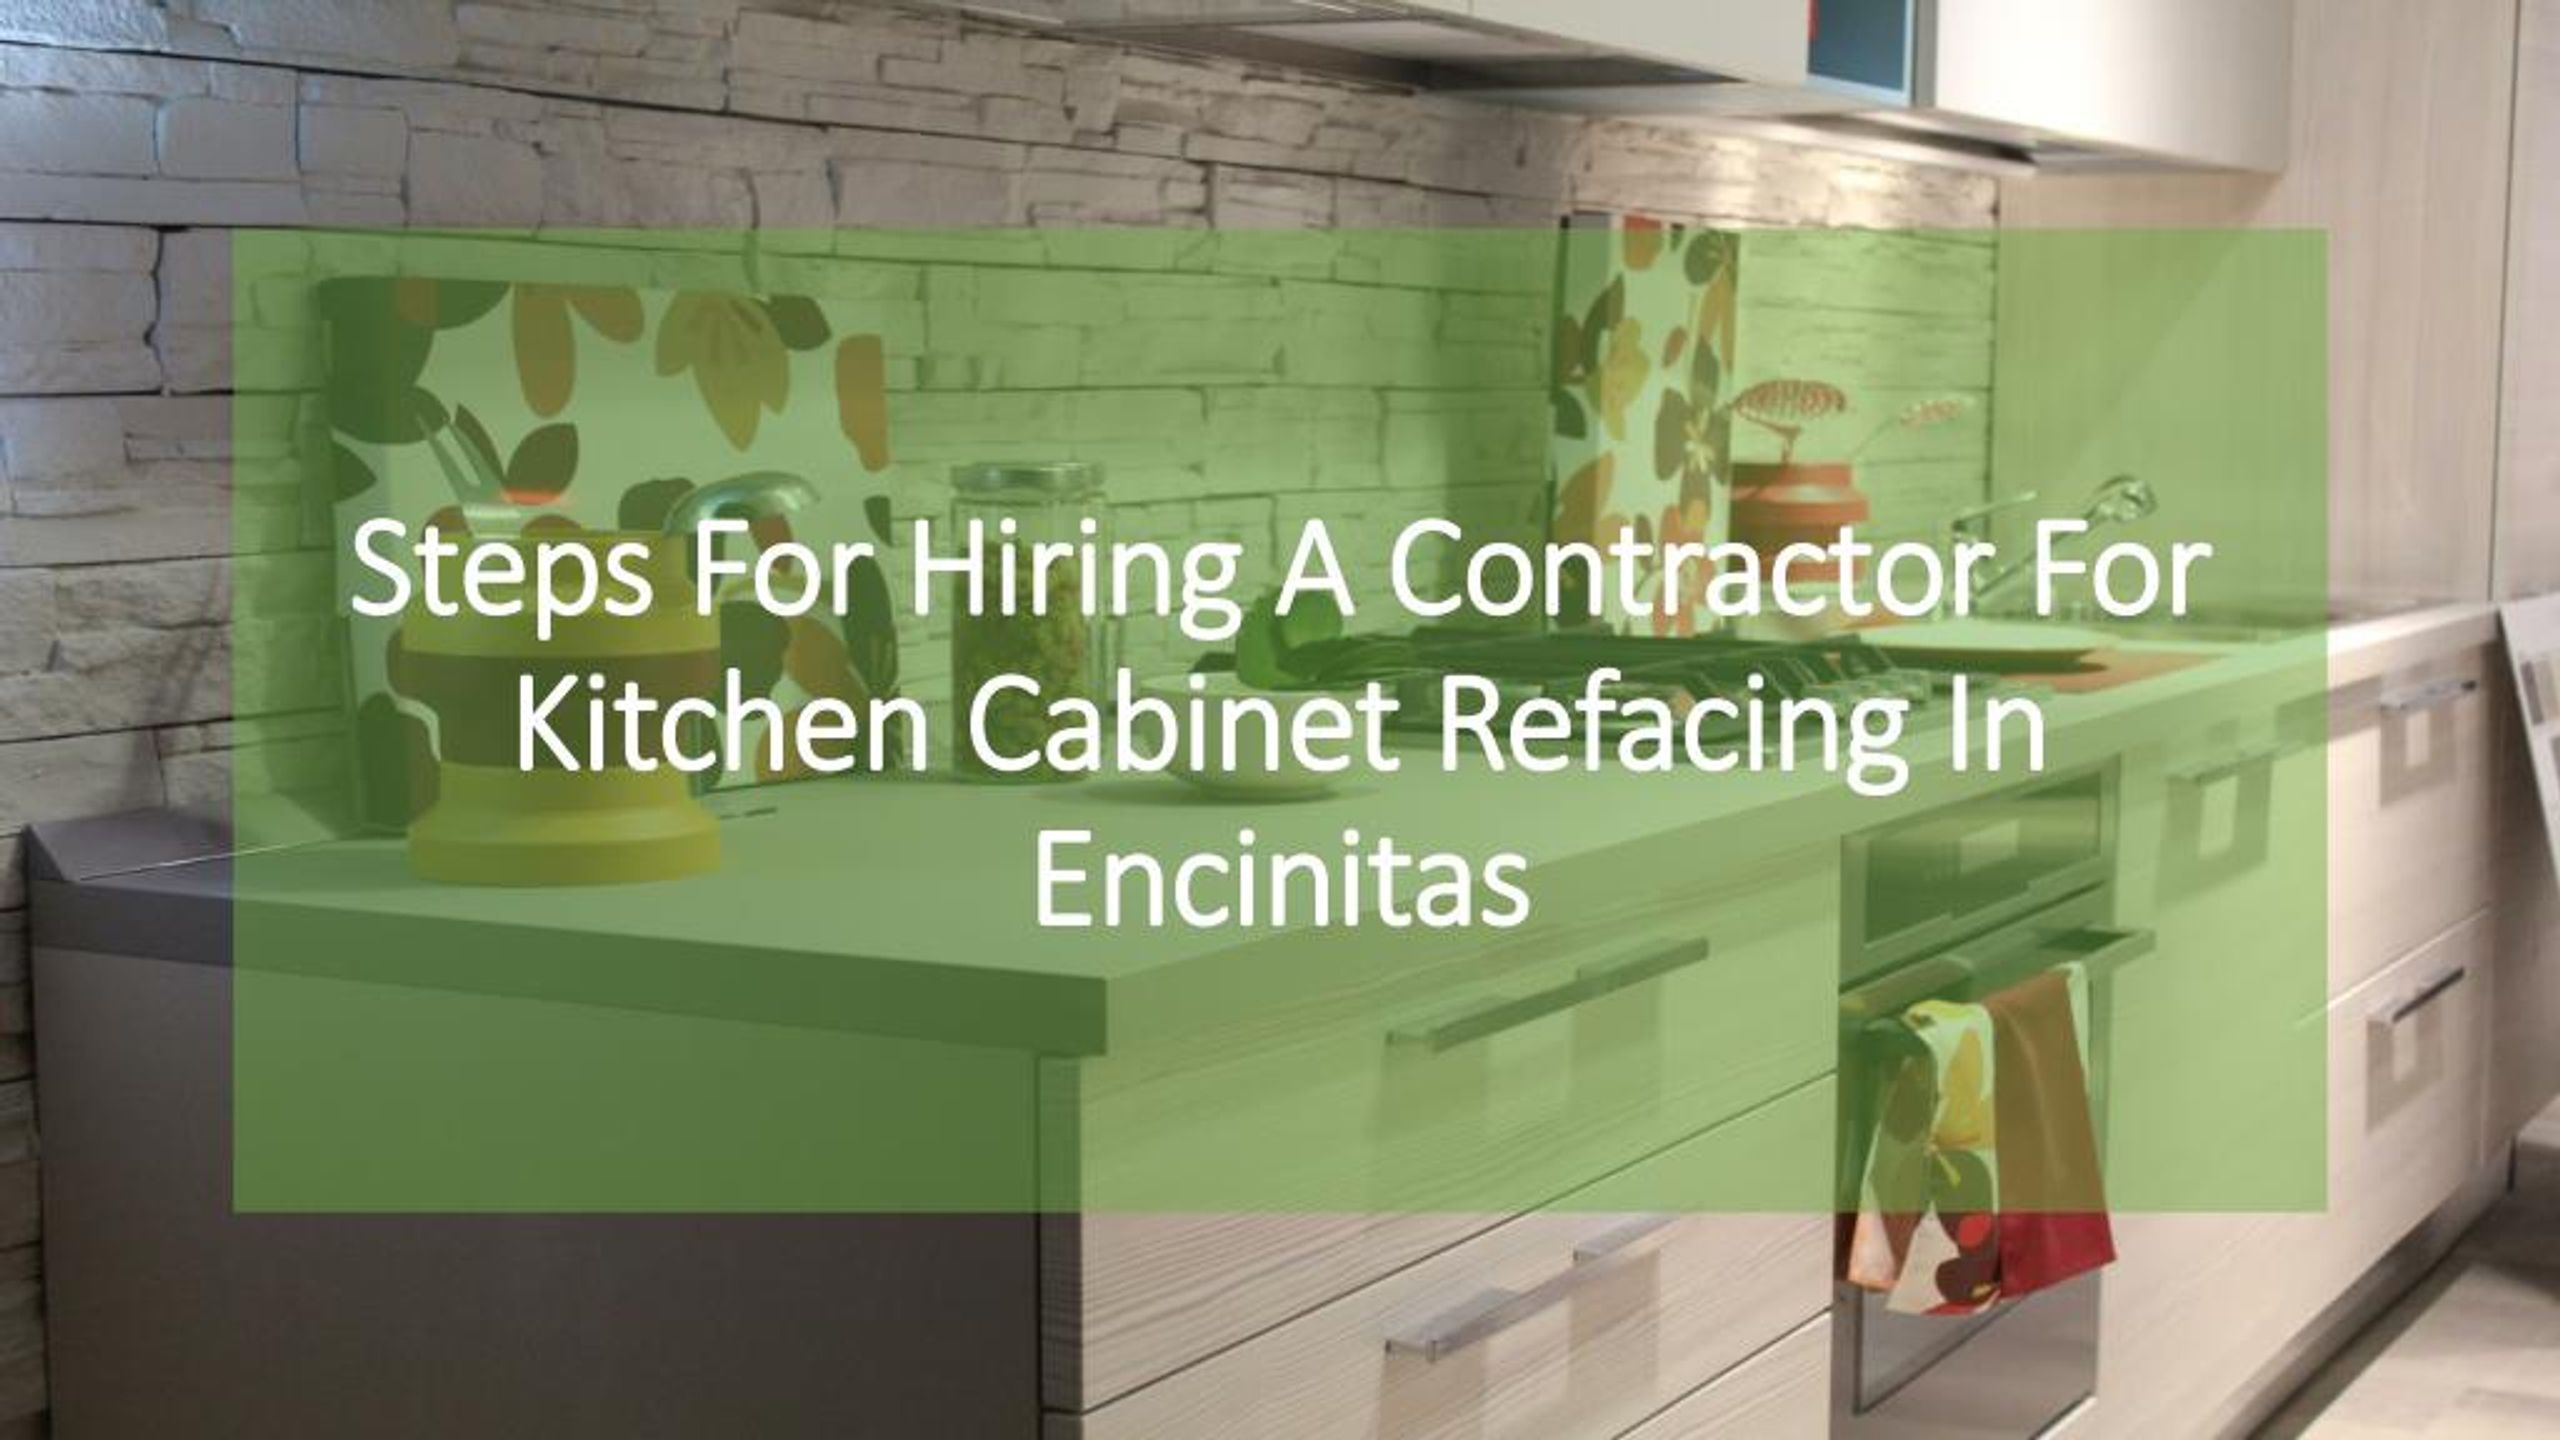 Ppt Steps For Hiring A Contractor For Kitchen Cabinet Refacing